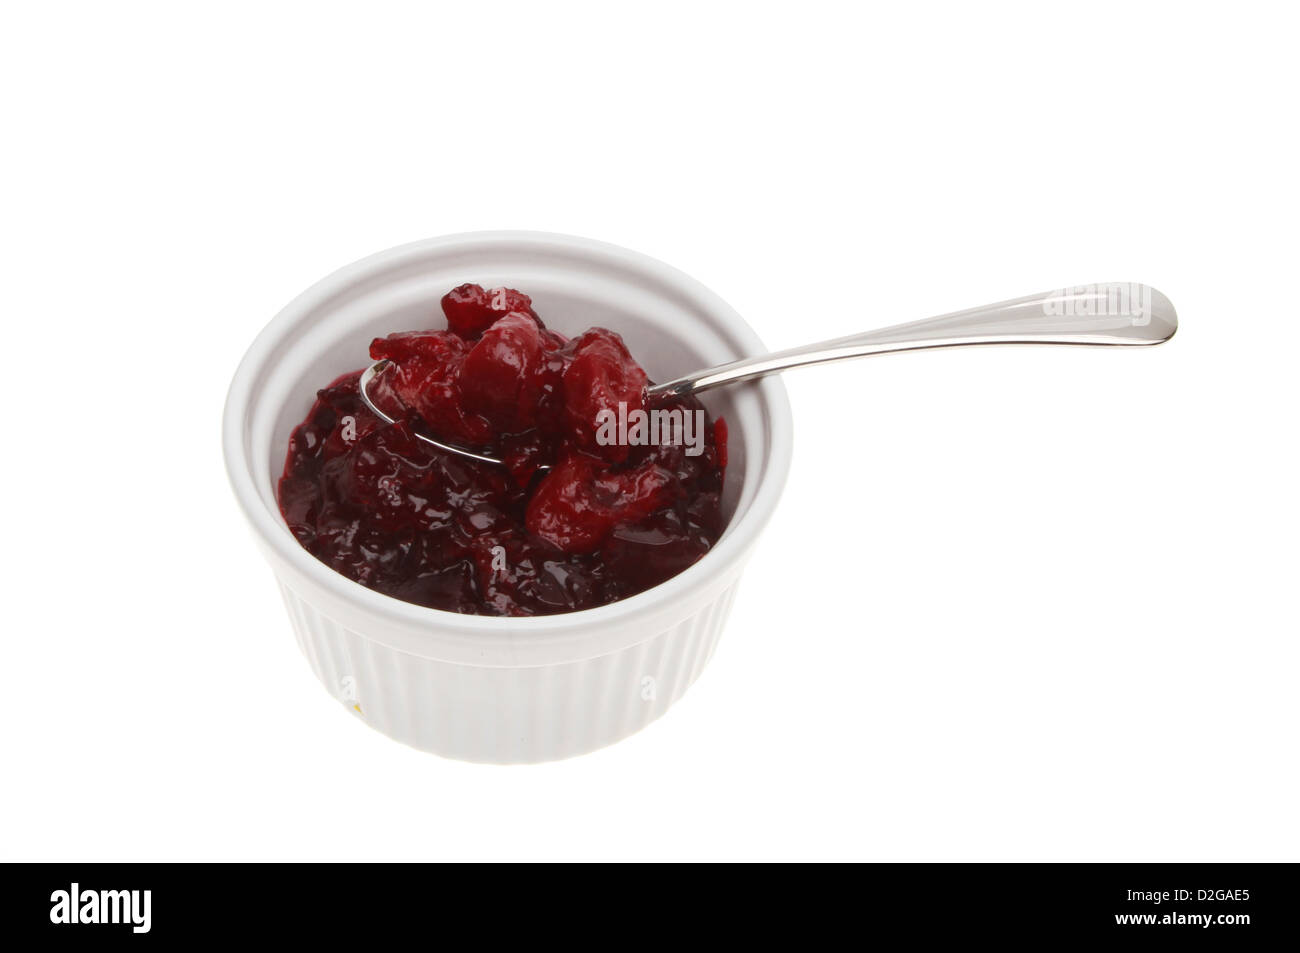 Cherry preserve with whole fruit and a spoon in a ramekin isolated against white Stock Photo